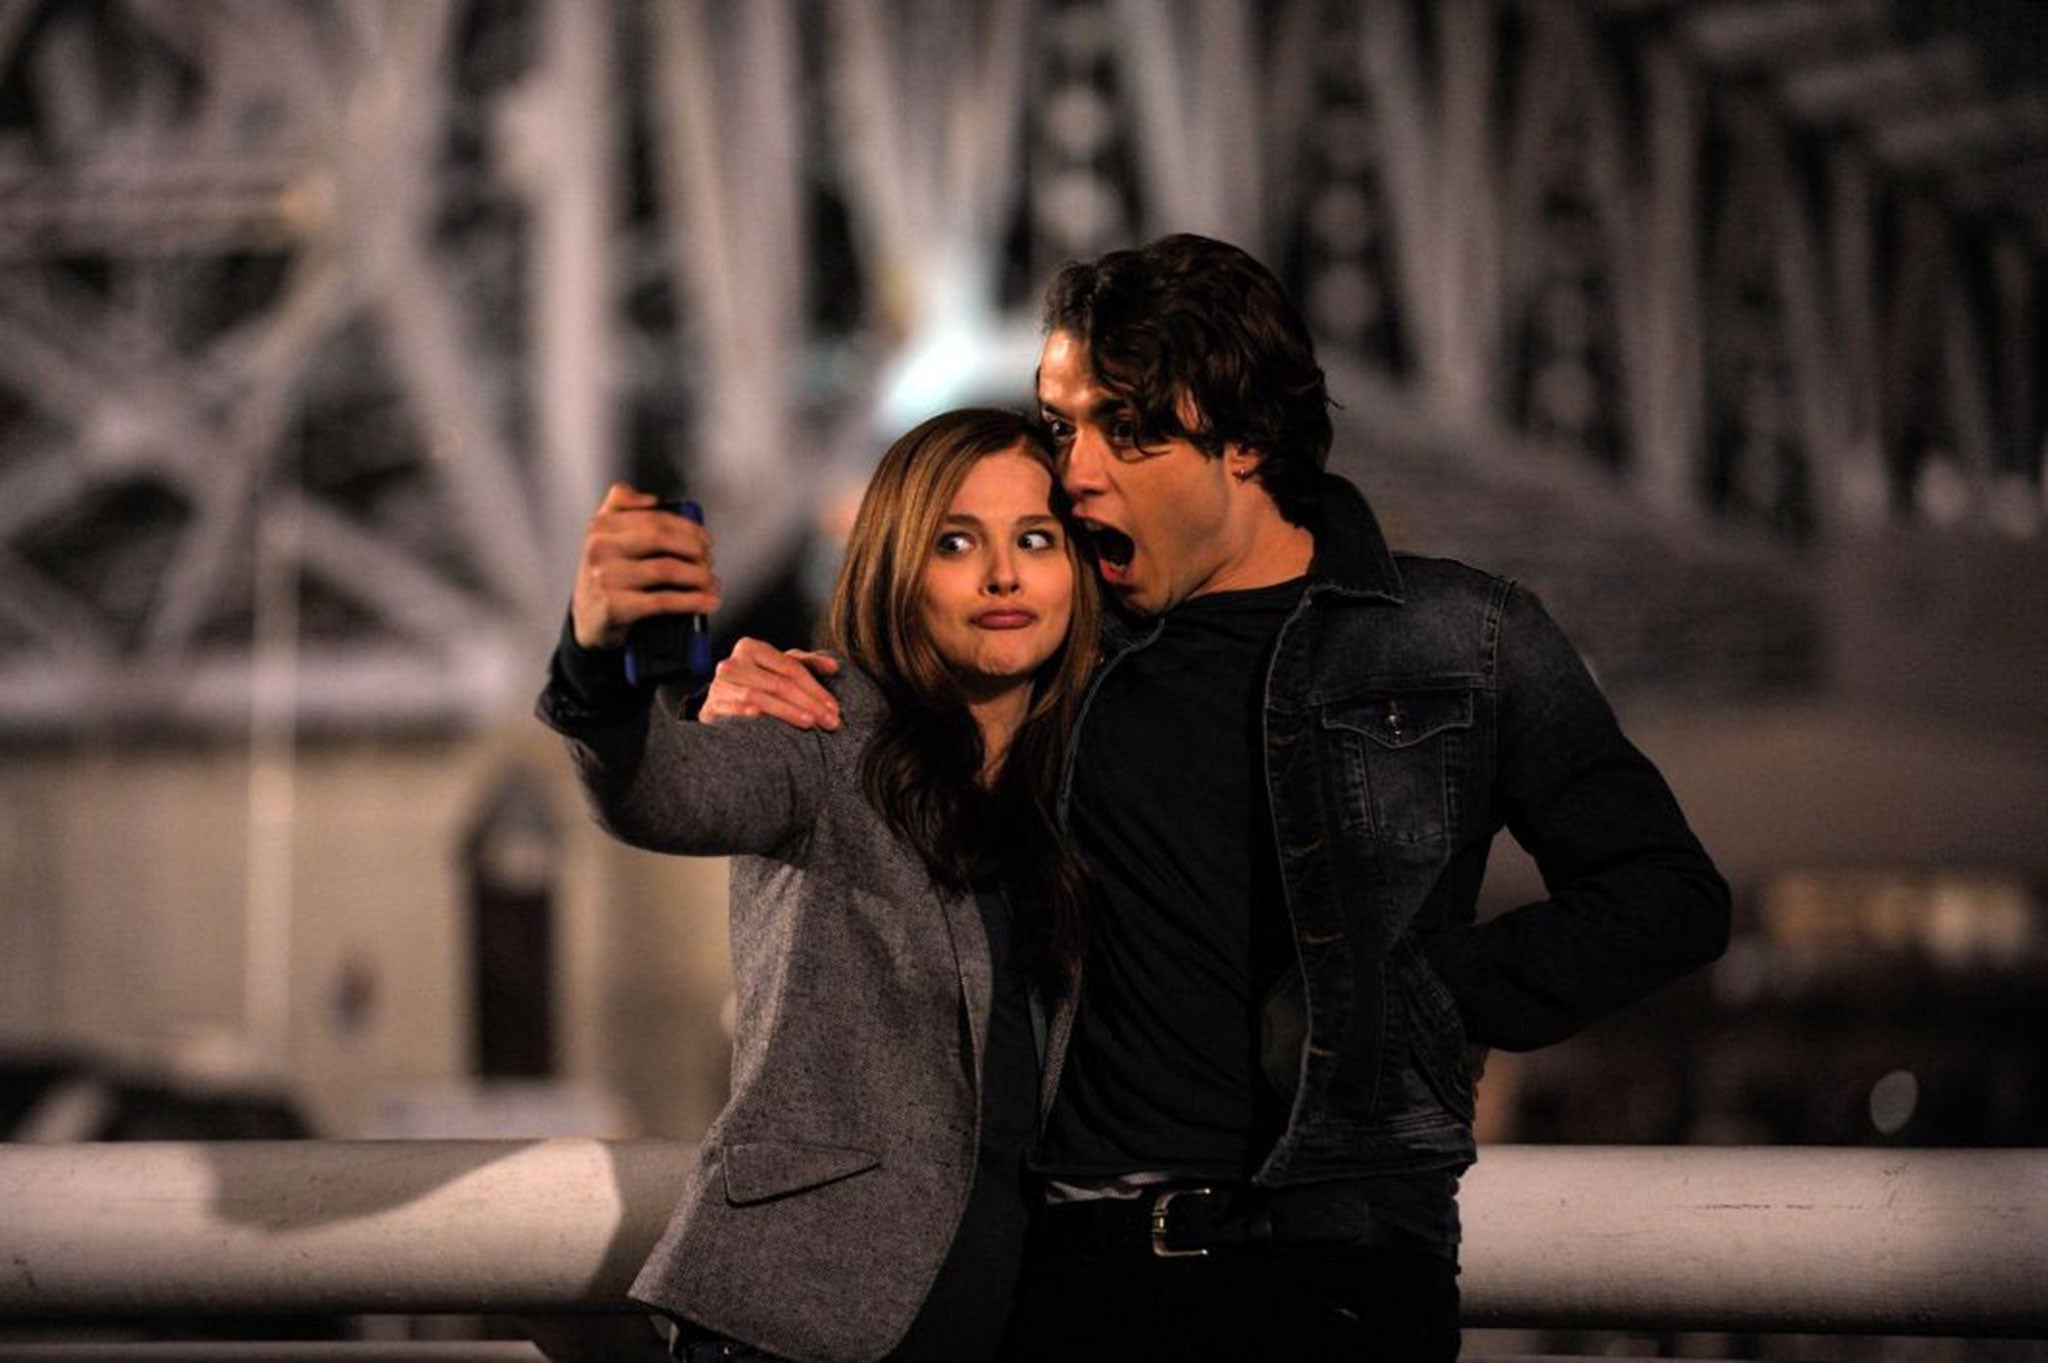 Say cheesy: Chloë Grace Moretz and Jamie Blackley in If I Stay